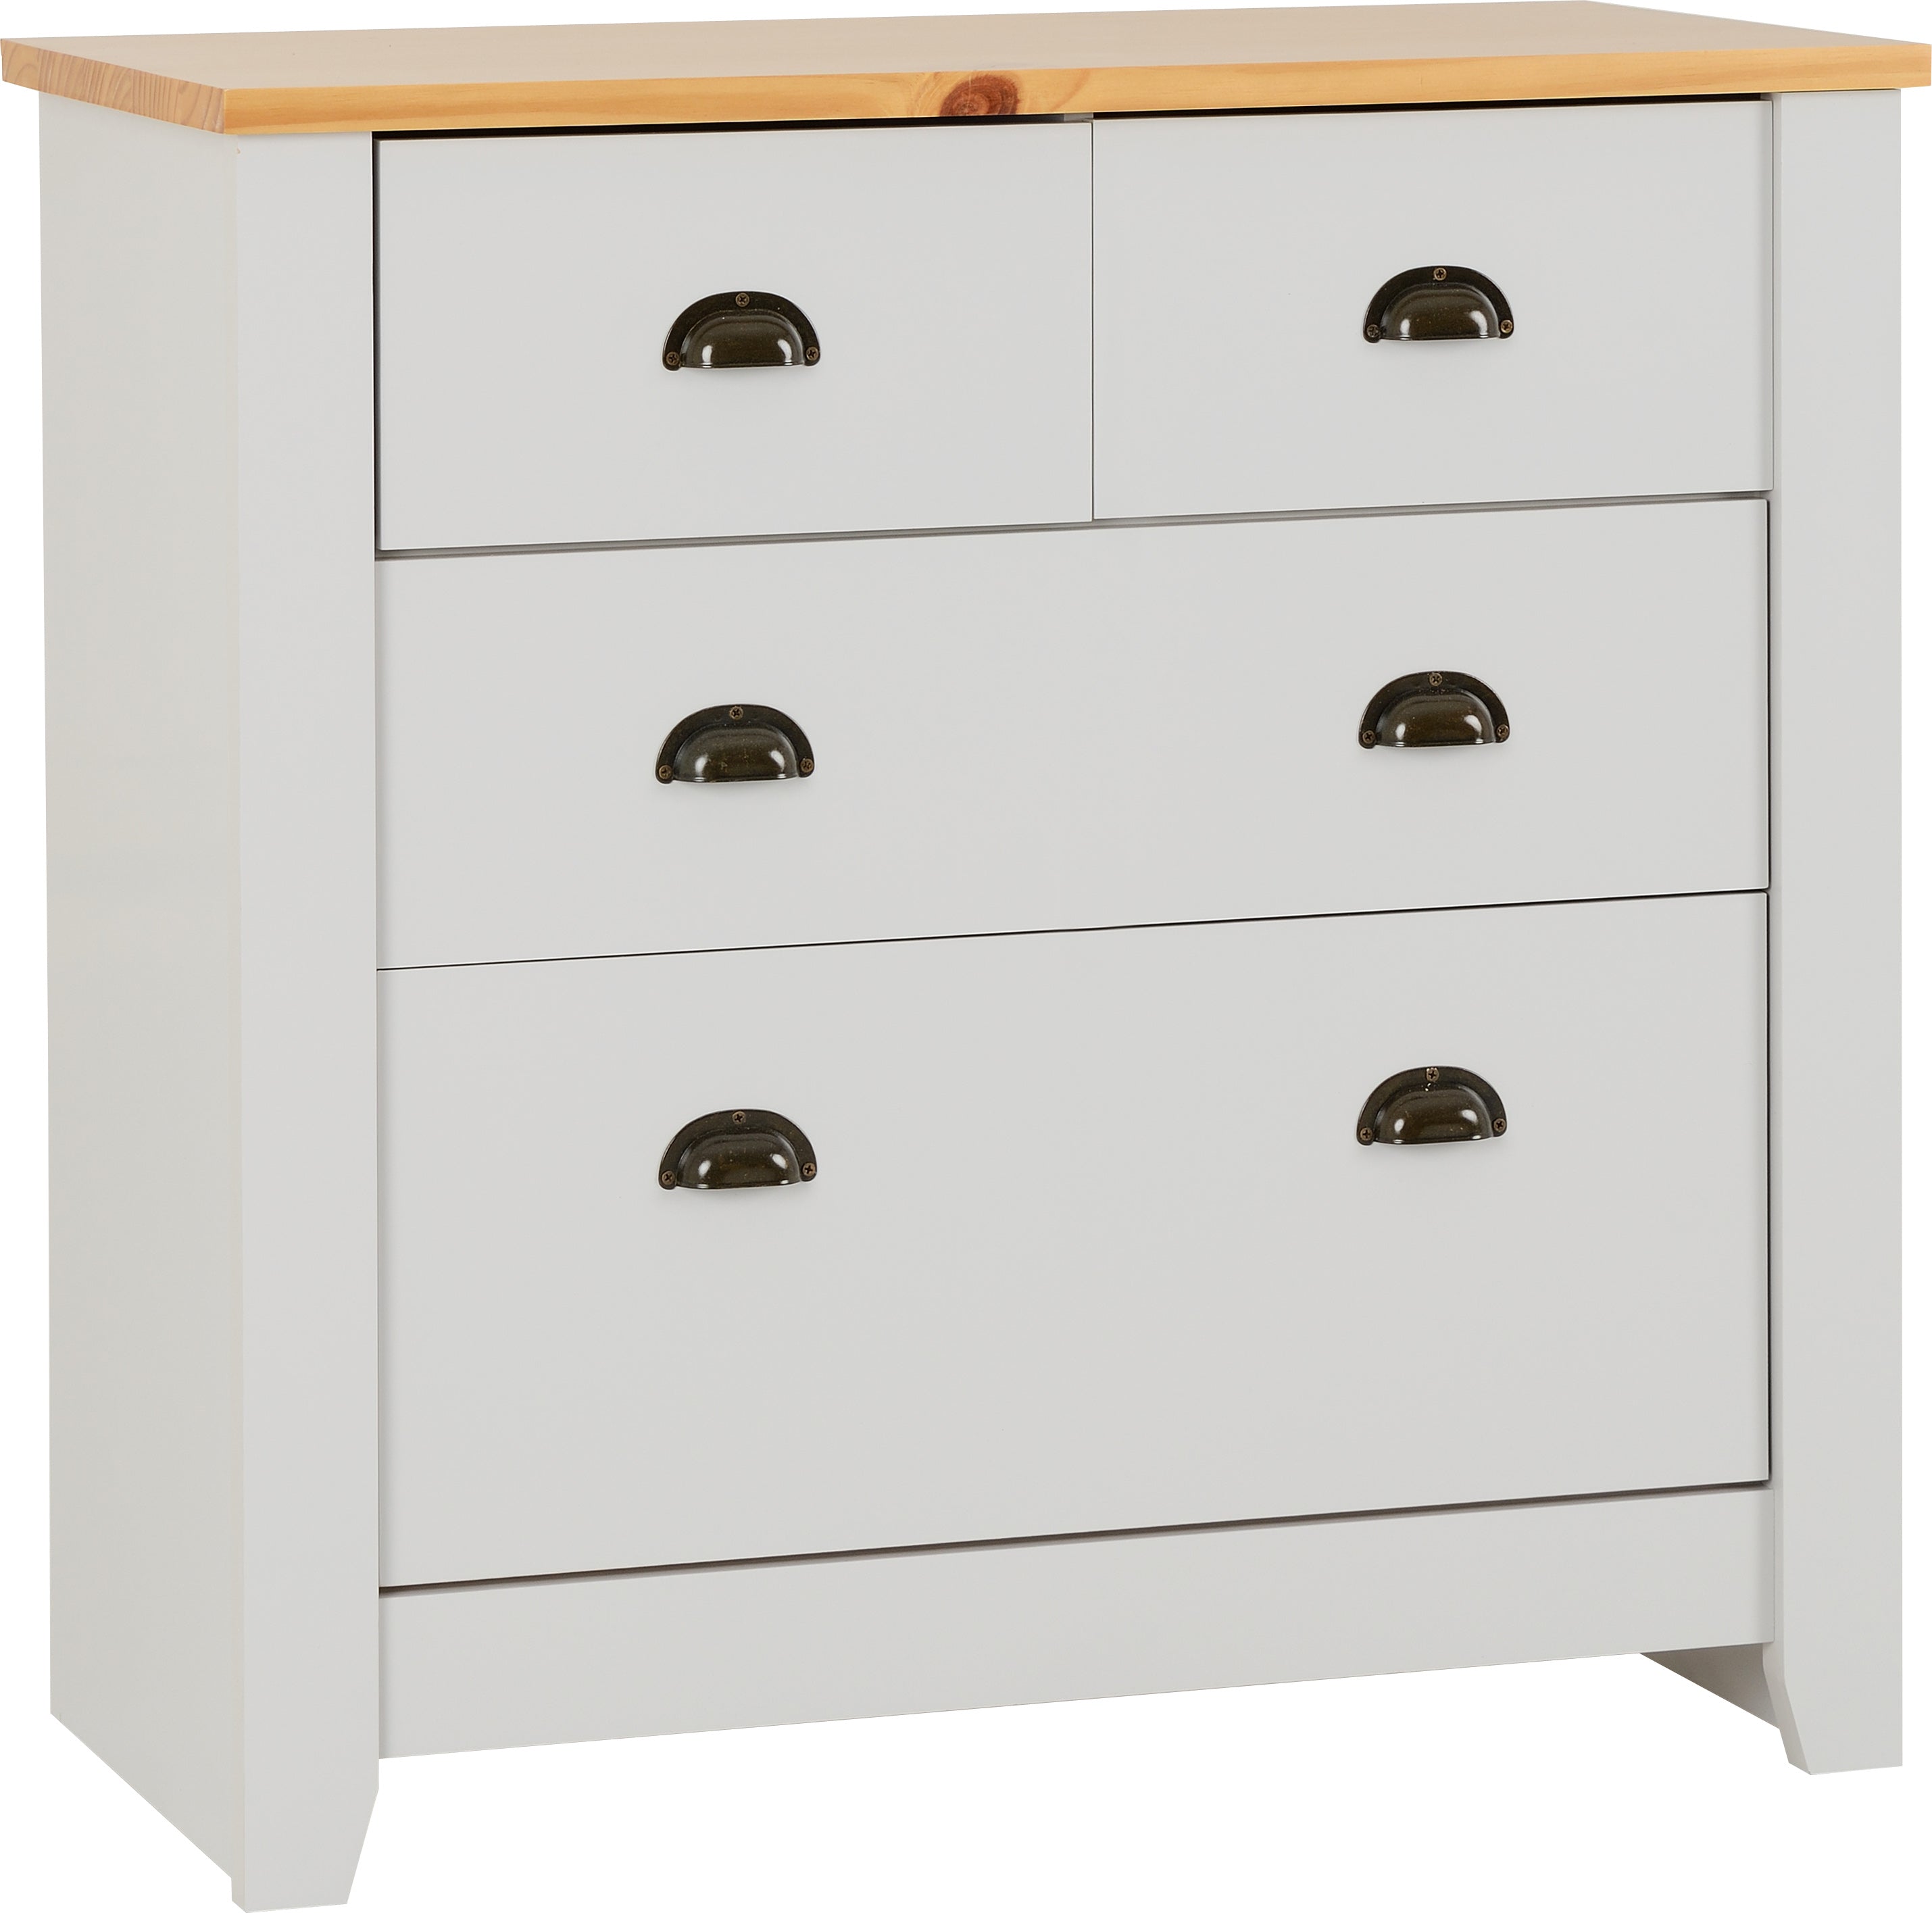 2+2 Drawer Chest Grey/Oak Lacquer